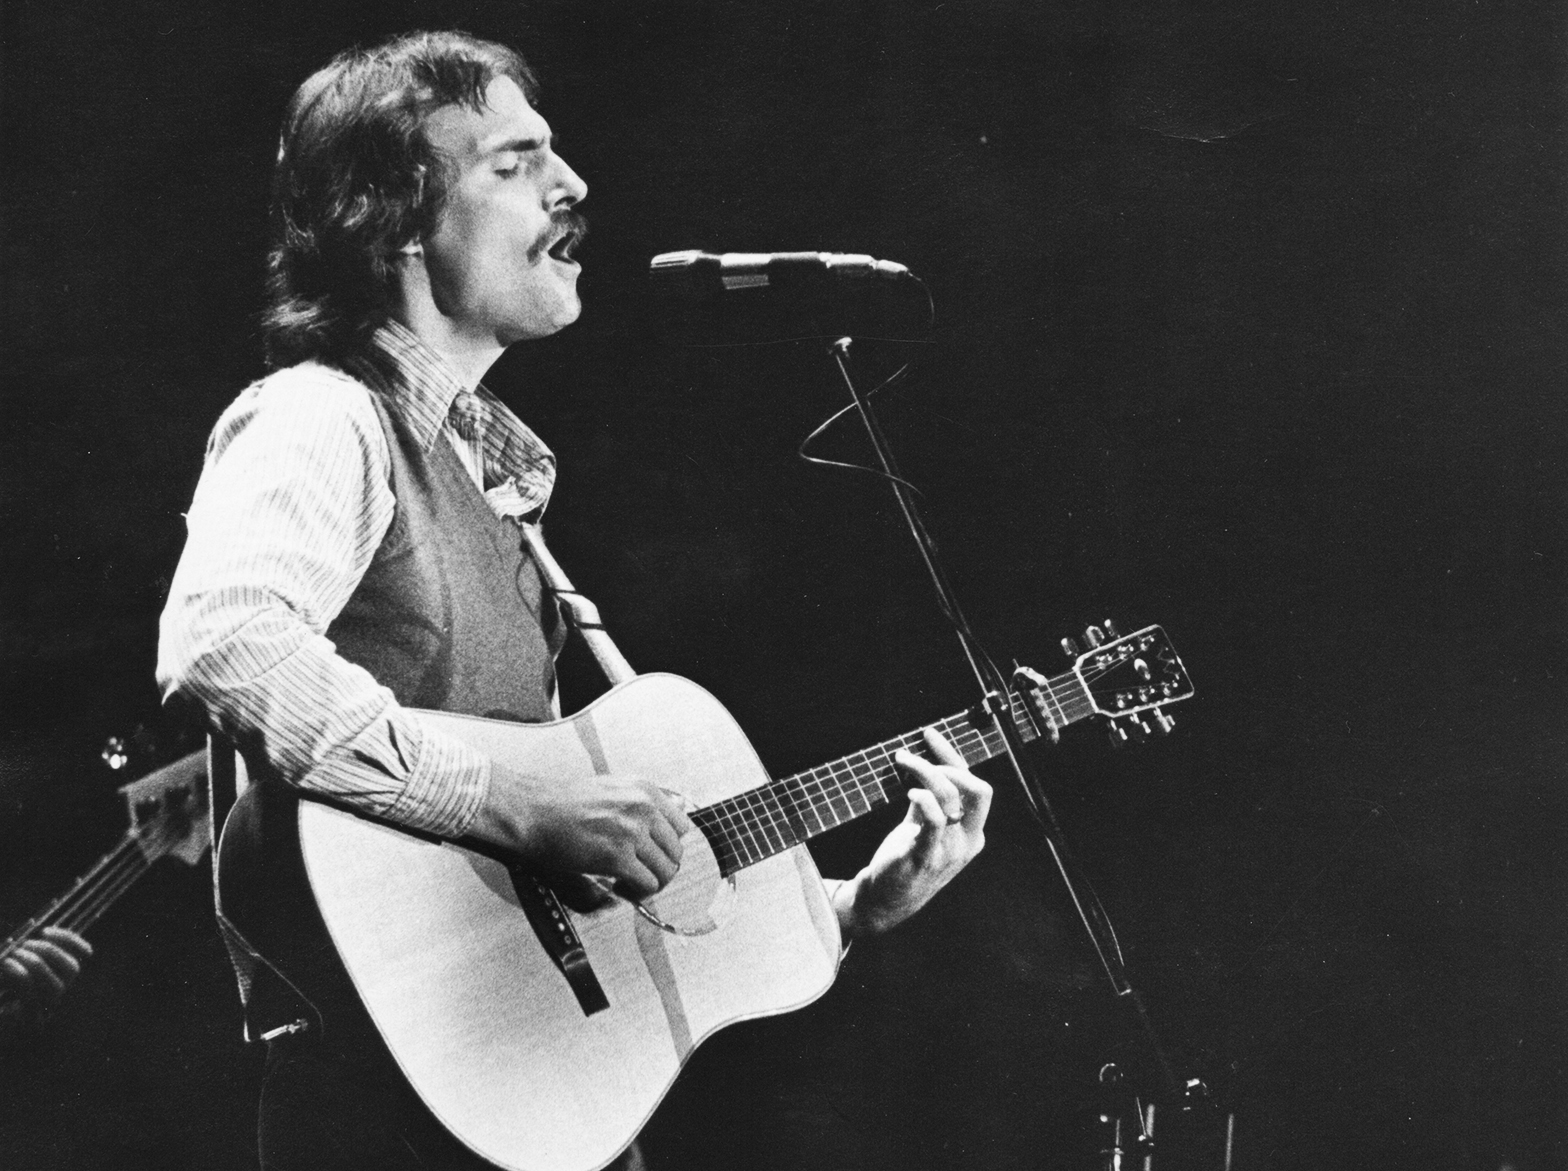 James Taylor strumming his guitar on stage while singing into microphone